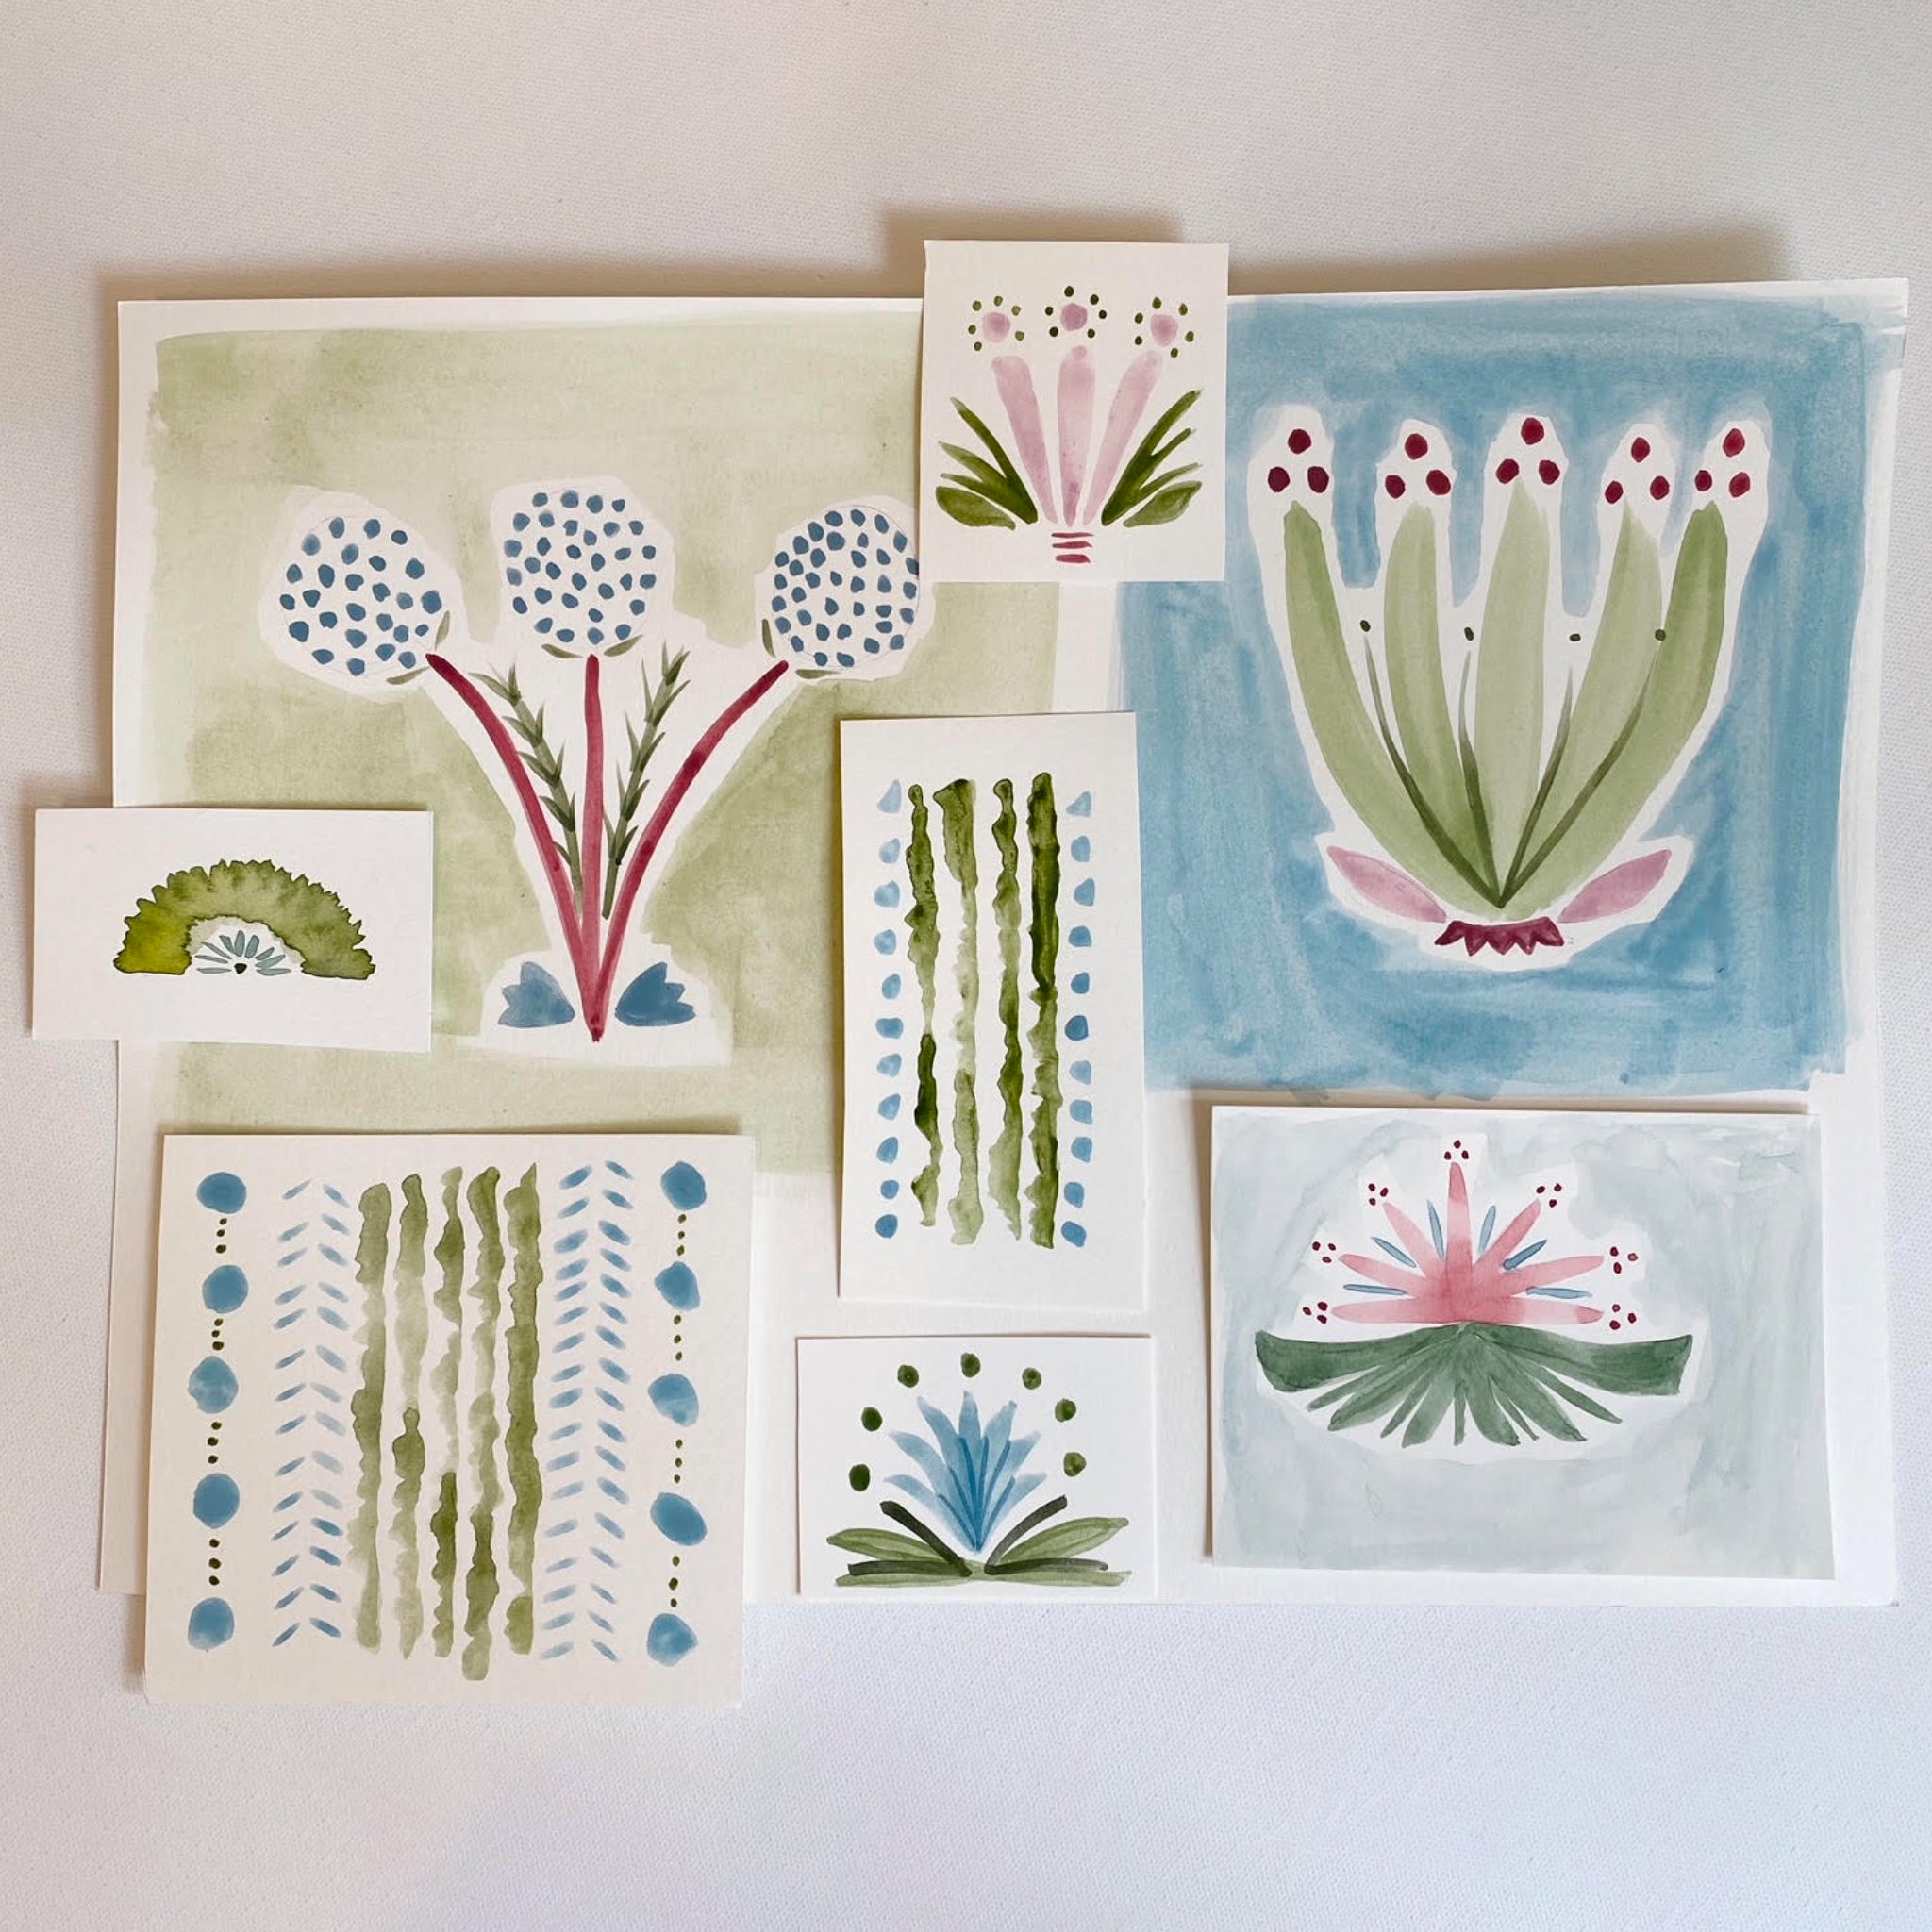 Hand-painted Floral Designs on Paper